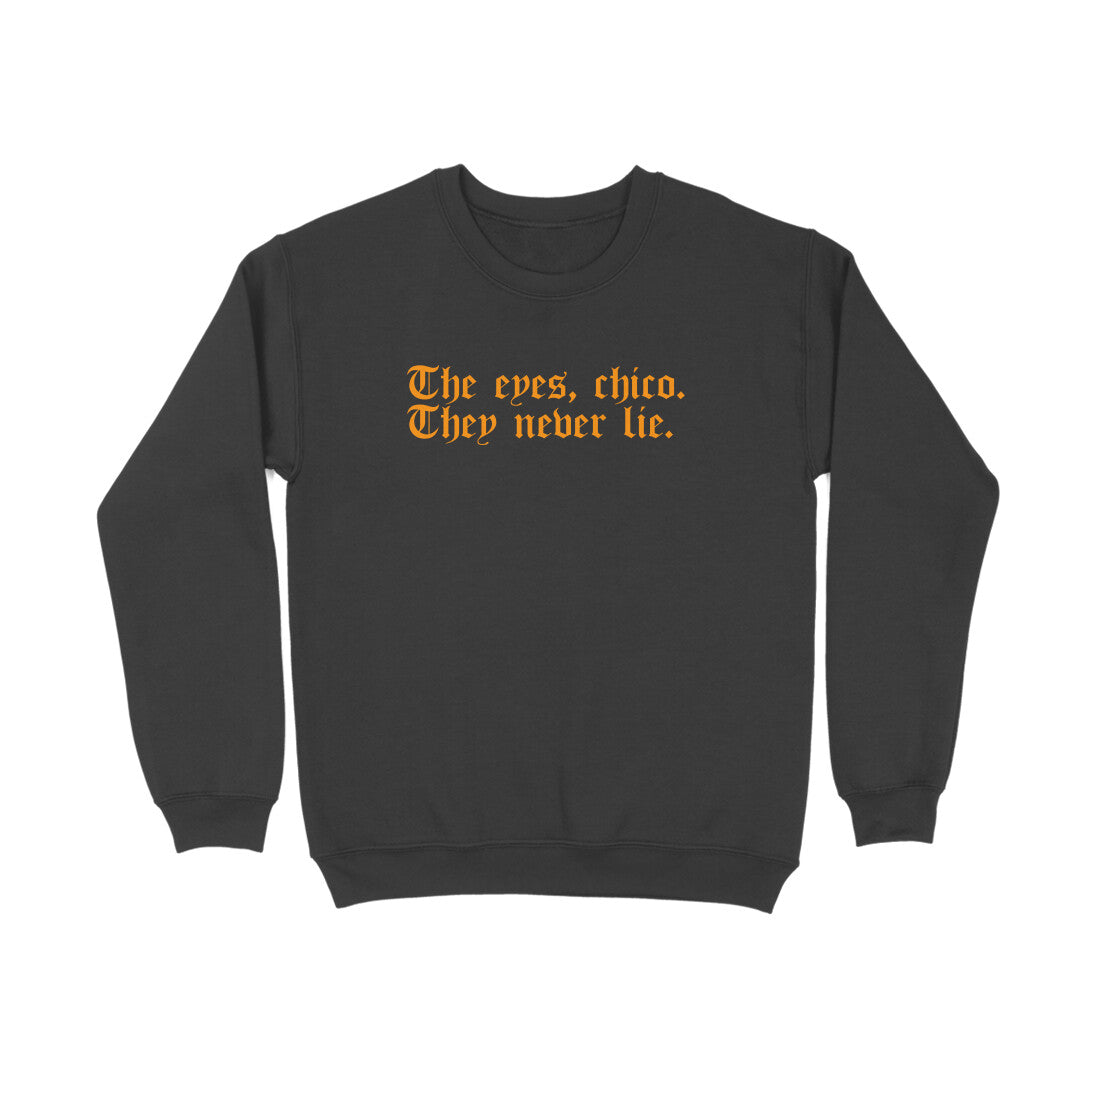 the scarface - eyes chico they never lie sweatshirt black